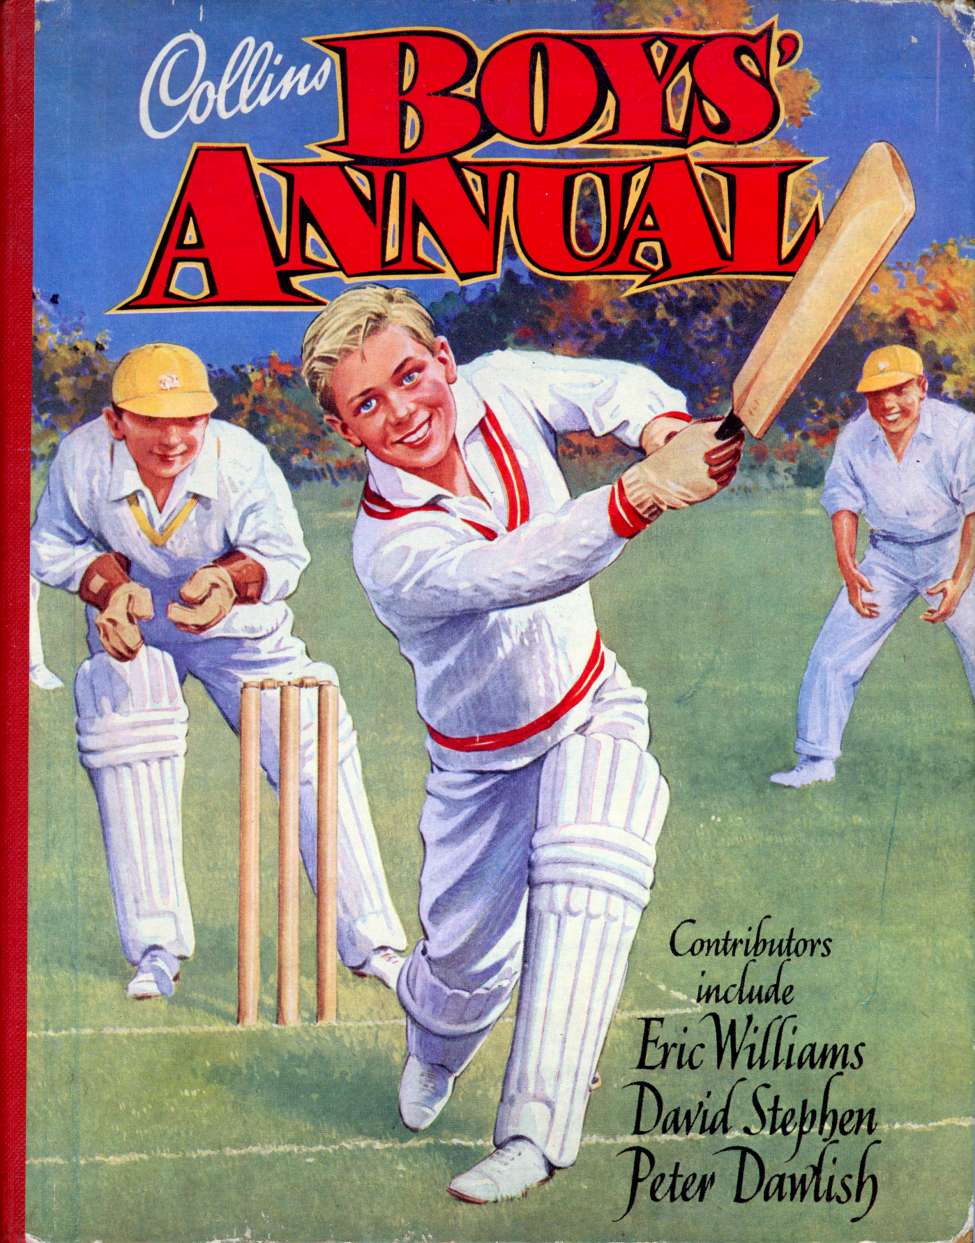 Comic Book Cover For Collins Boys Annual c1950s